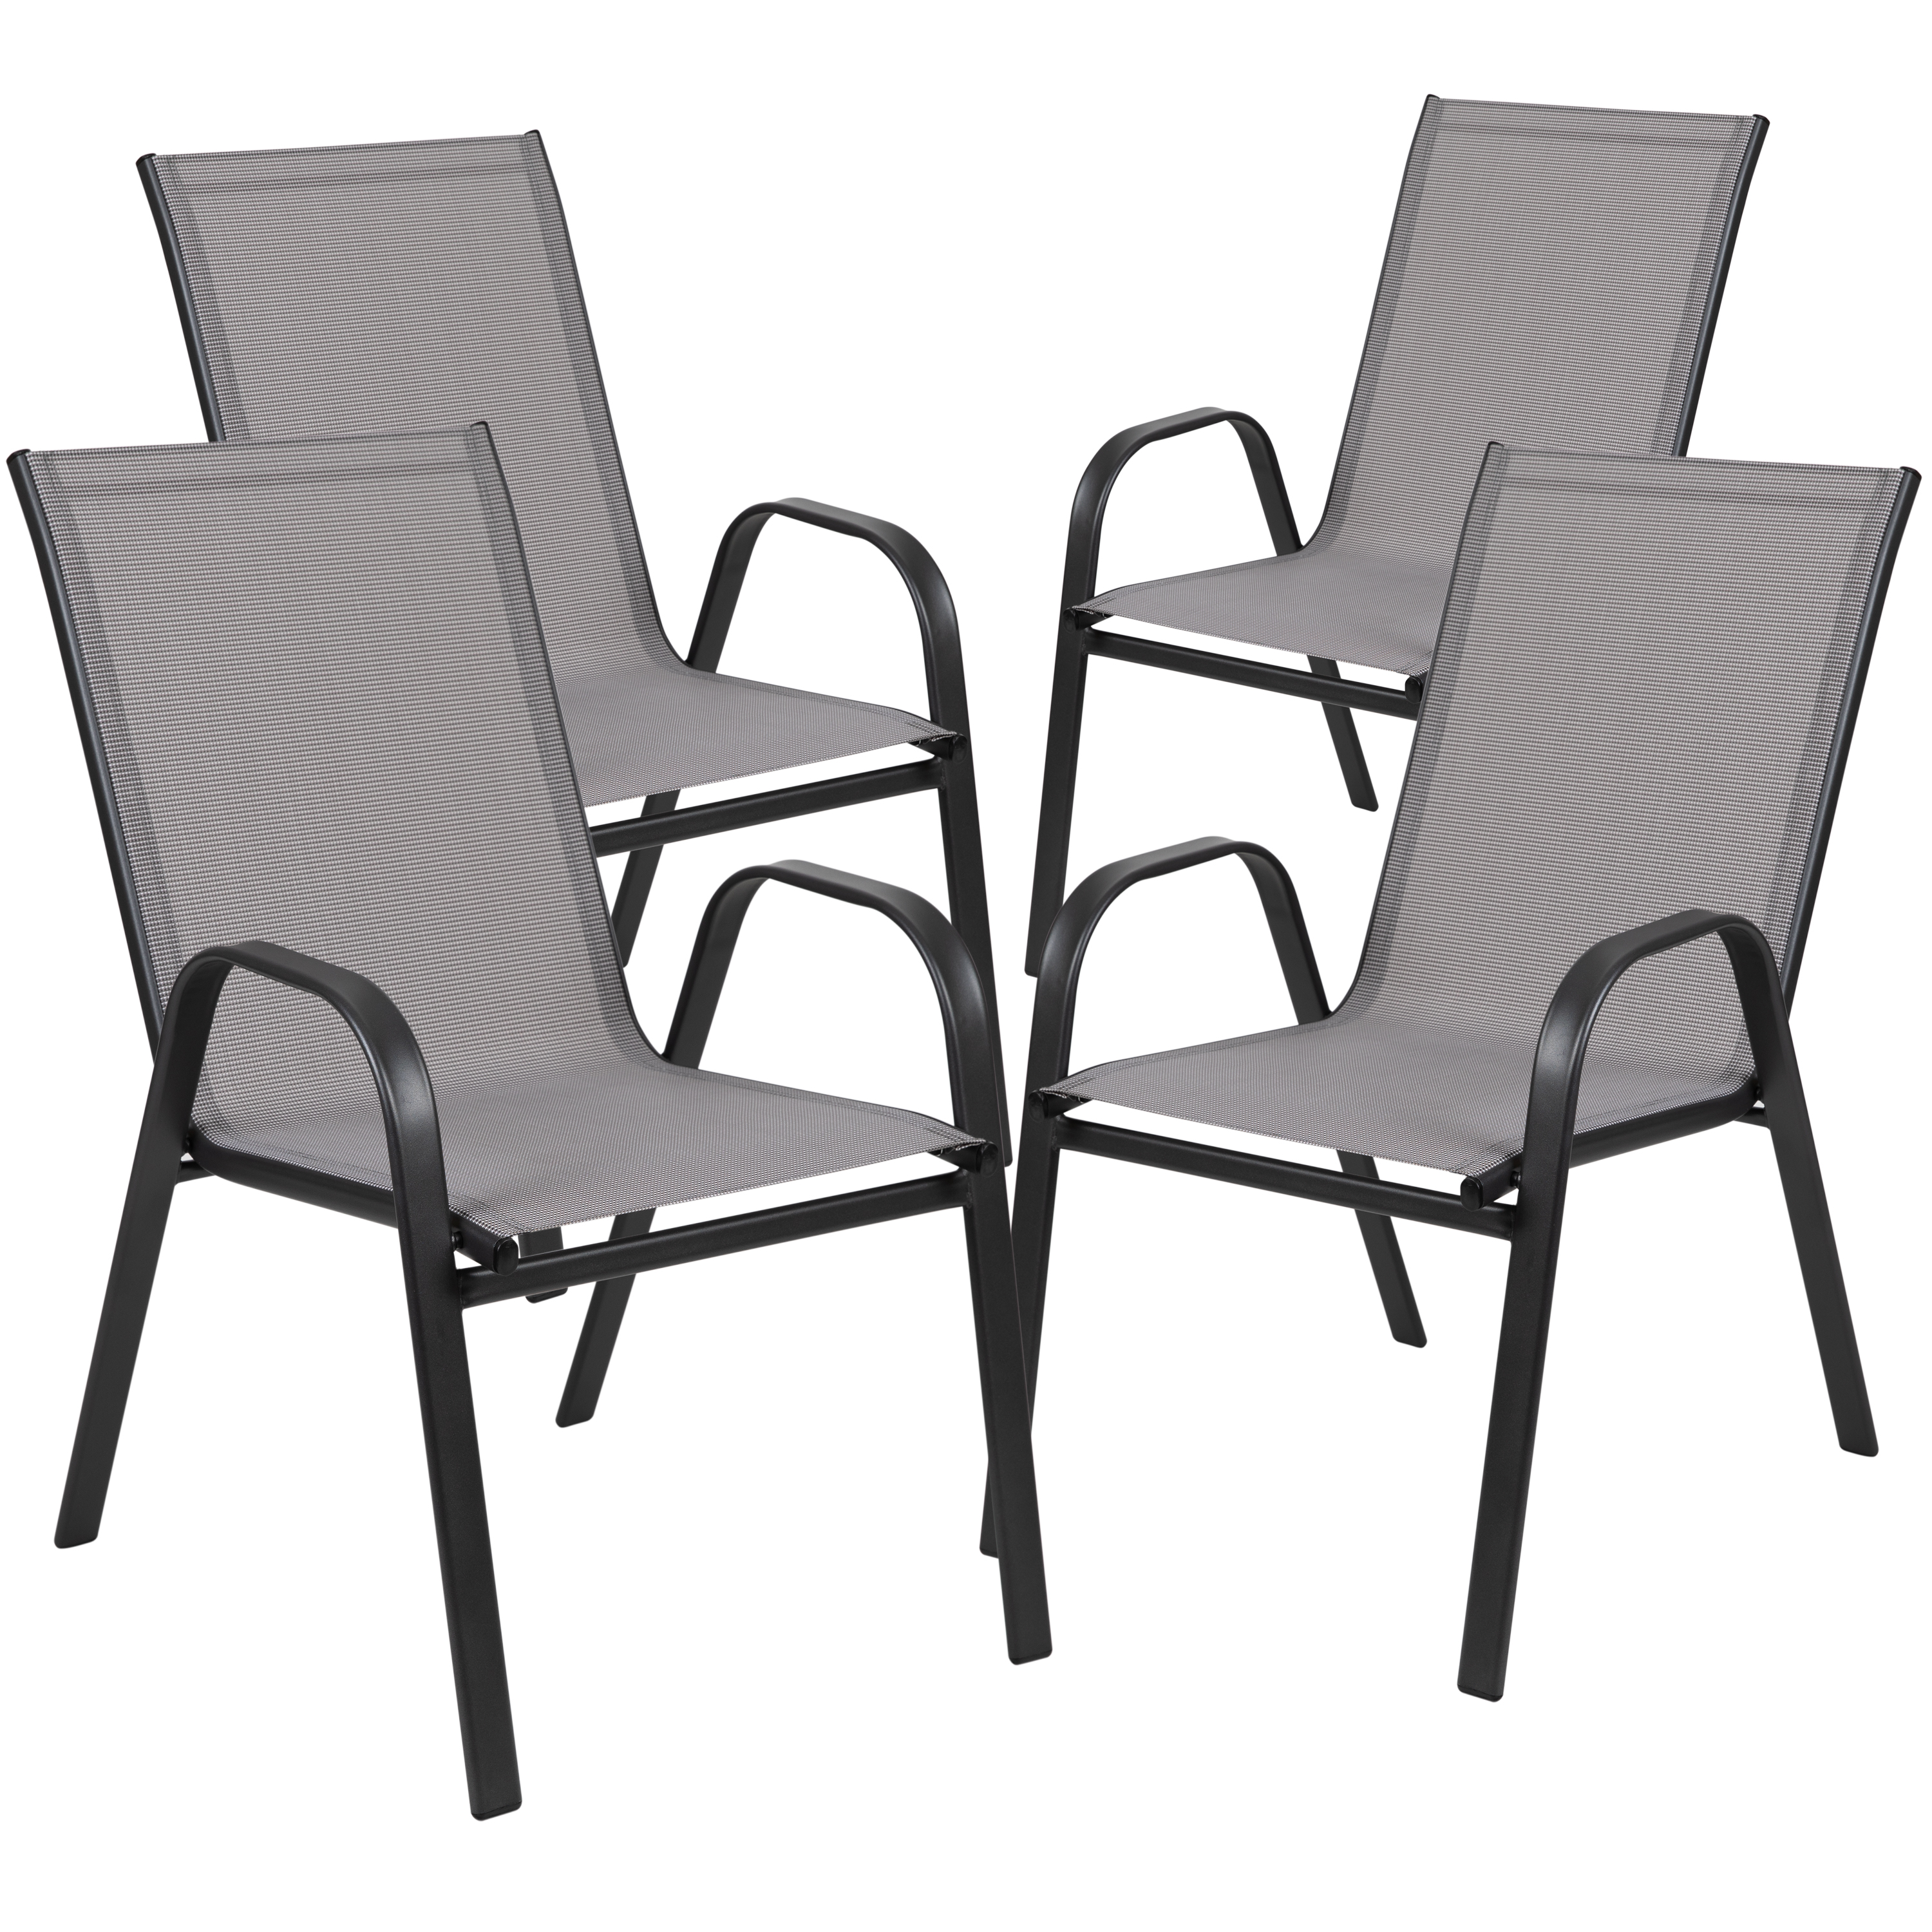 Flash Furniture 4-JJ-303C-G-GG Gray Outdoor Stack Chair with Flex Comfort Material and Metal Frame, Set of 4